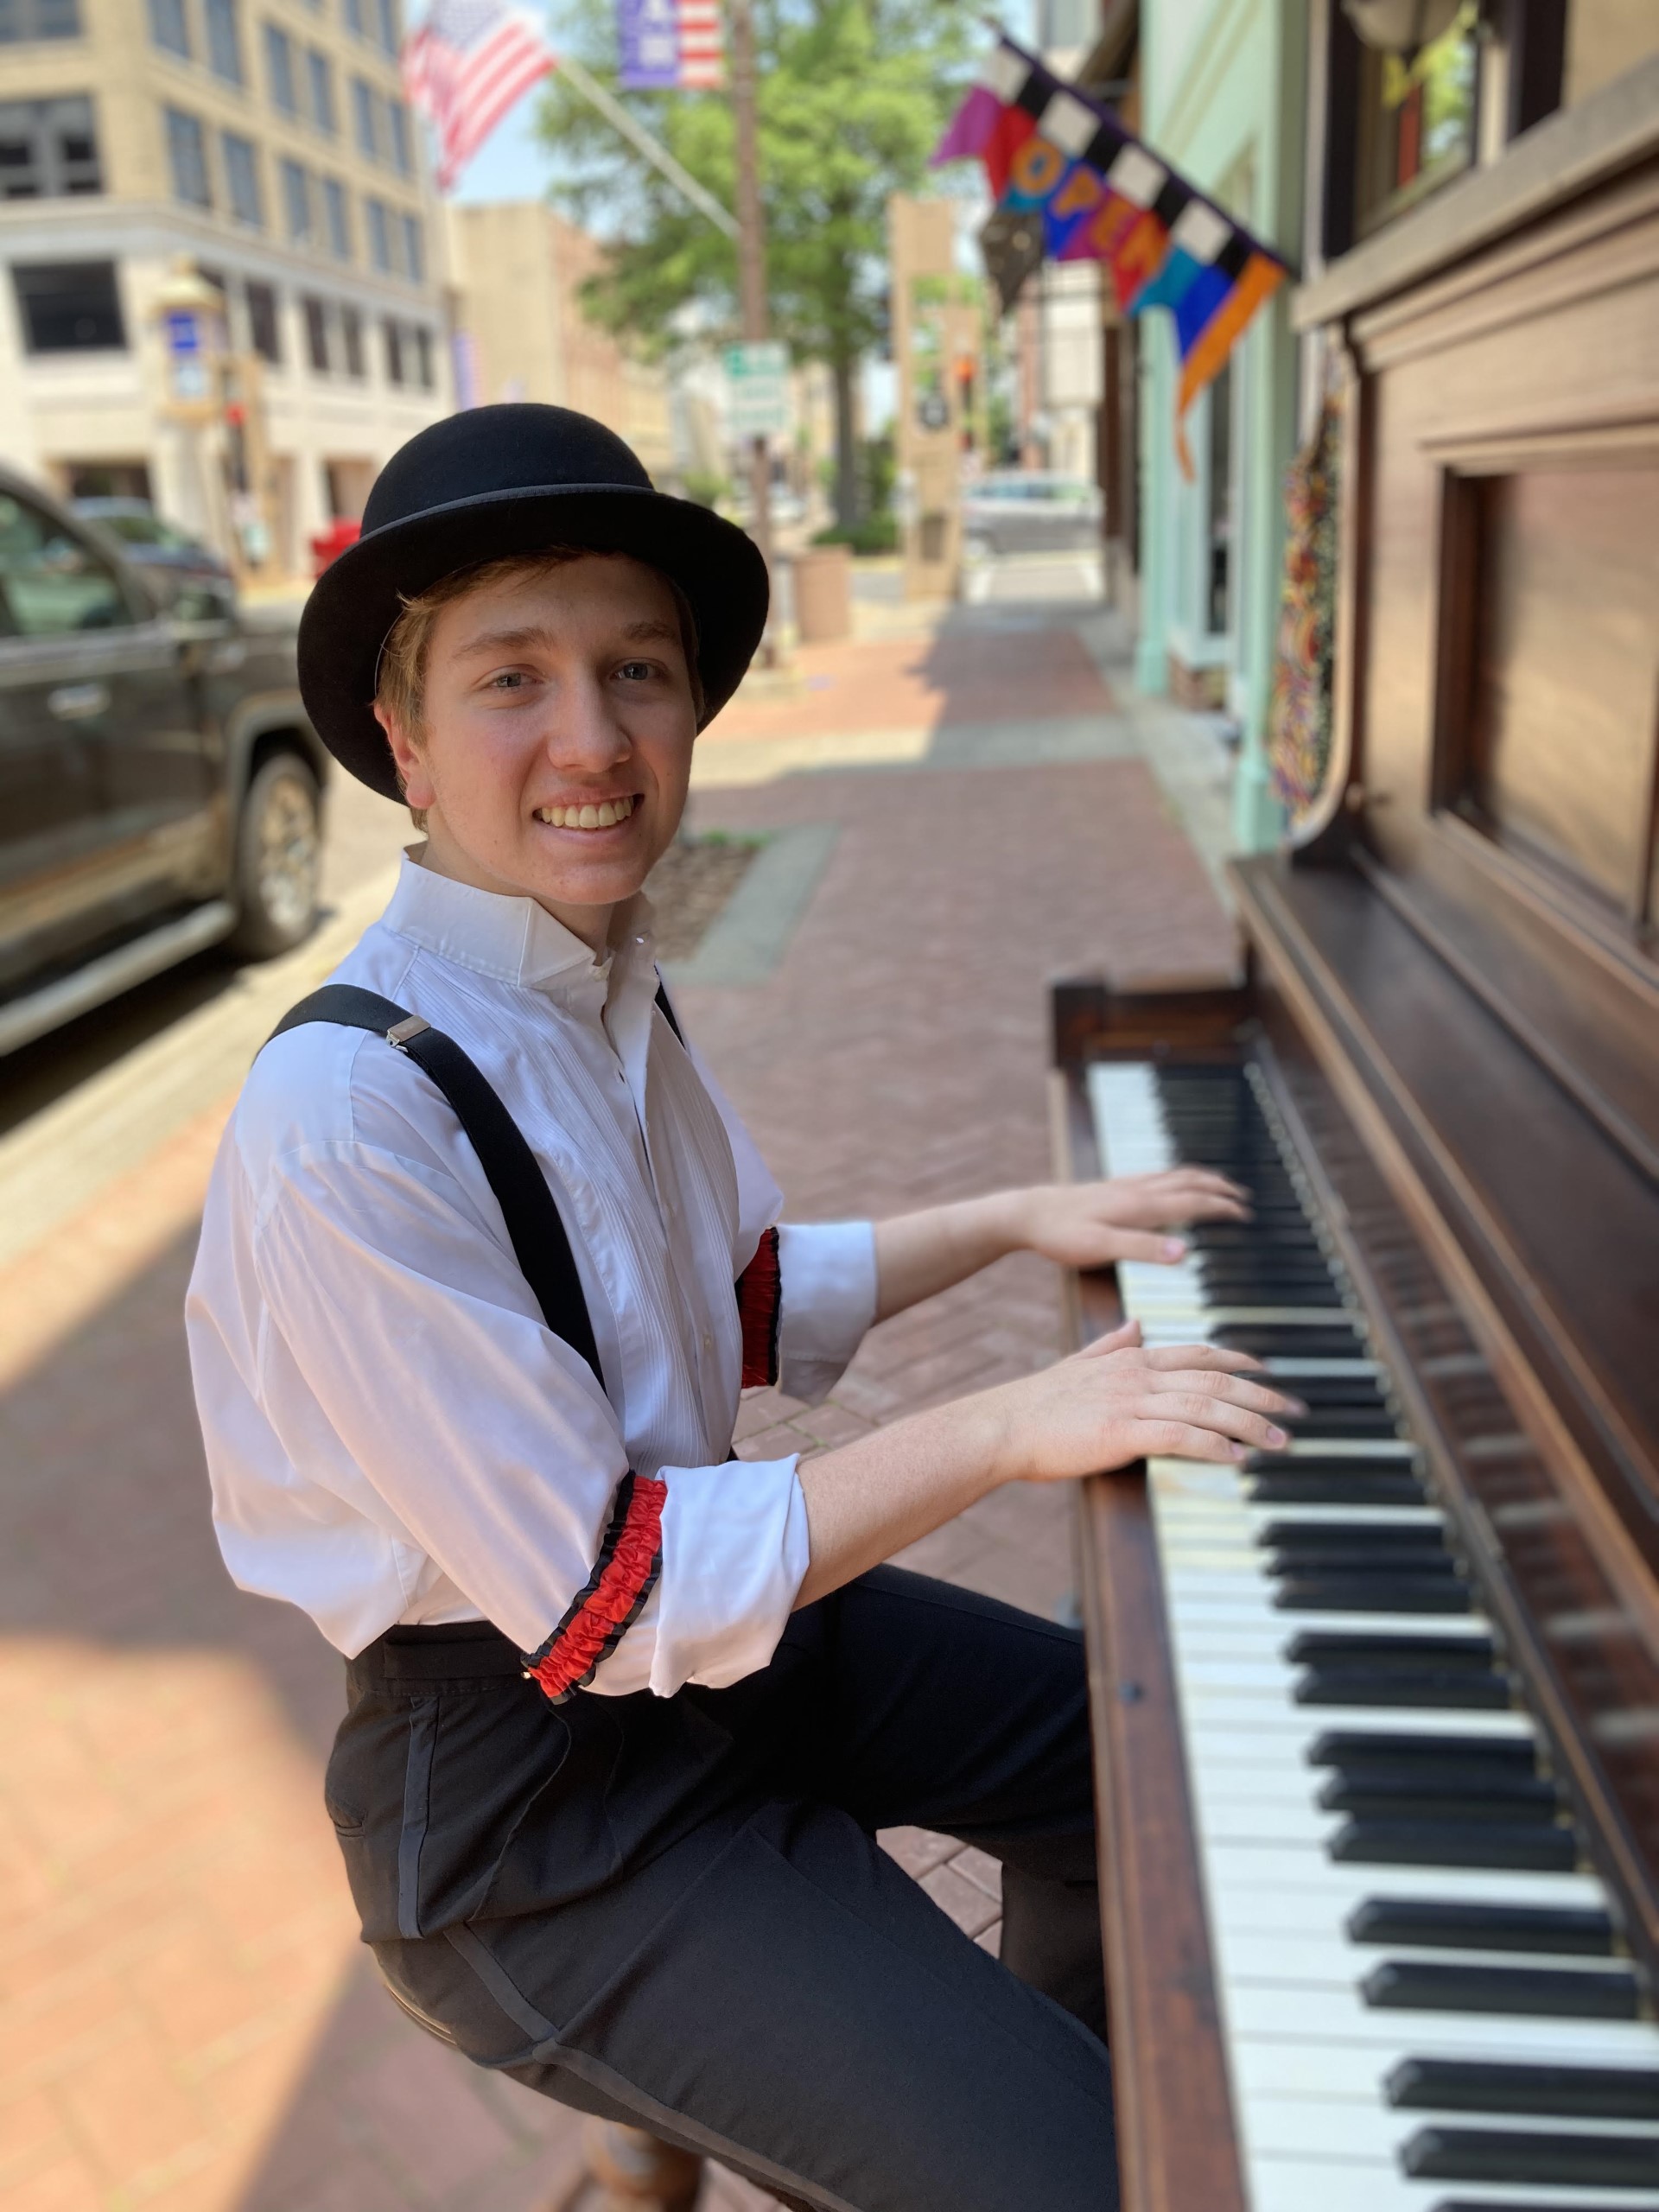 Join us for a lively concert of patriotic tunes featuring Paducah’s piano prodigy, Owen Cody